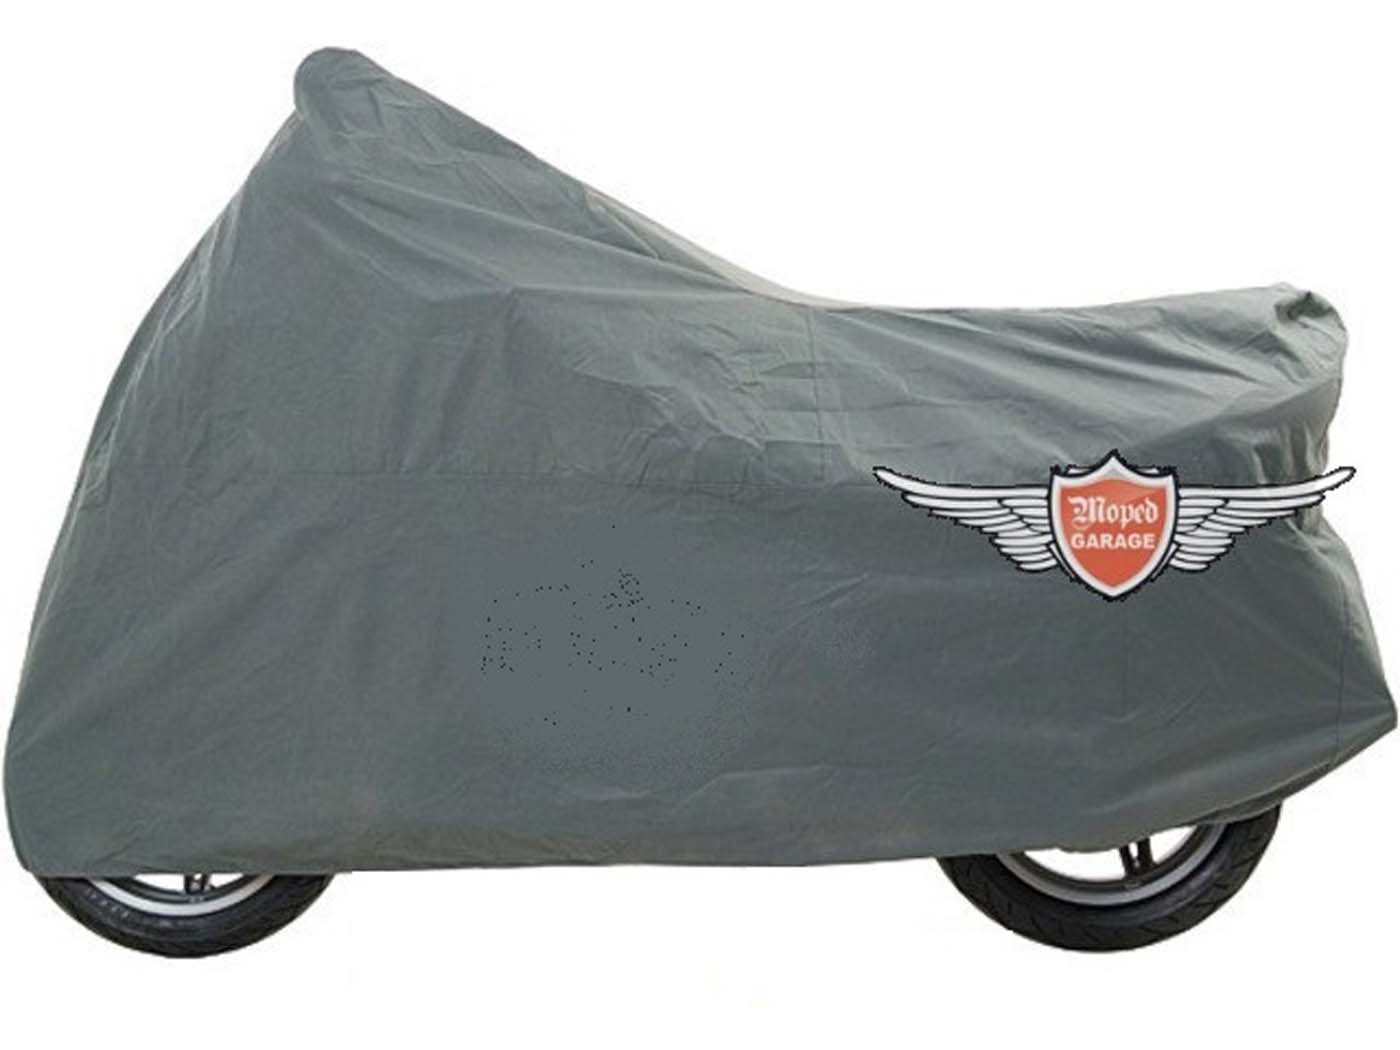 Indoor Protection Folding Garage For Moped Moped Mokick Scooter